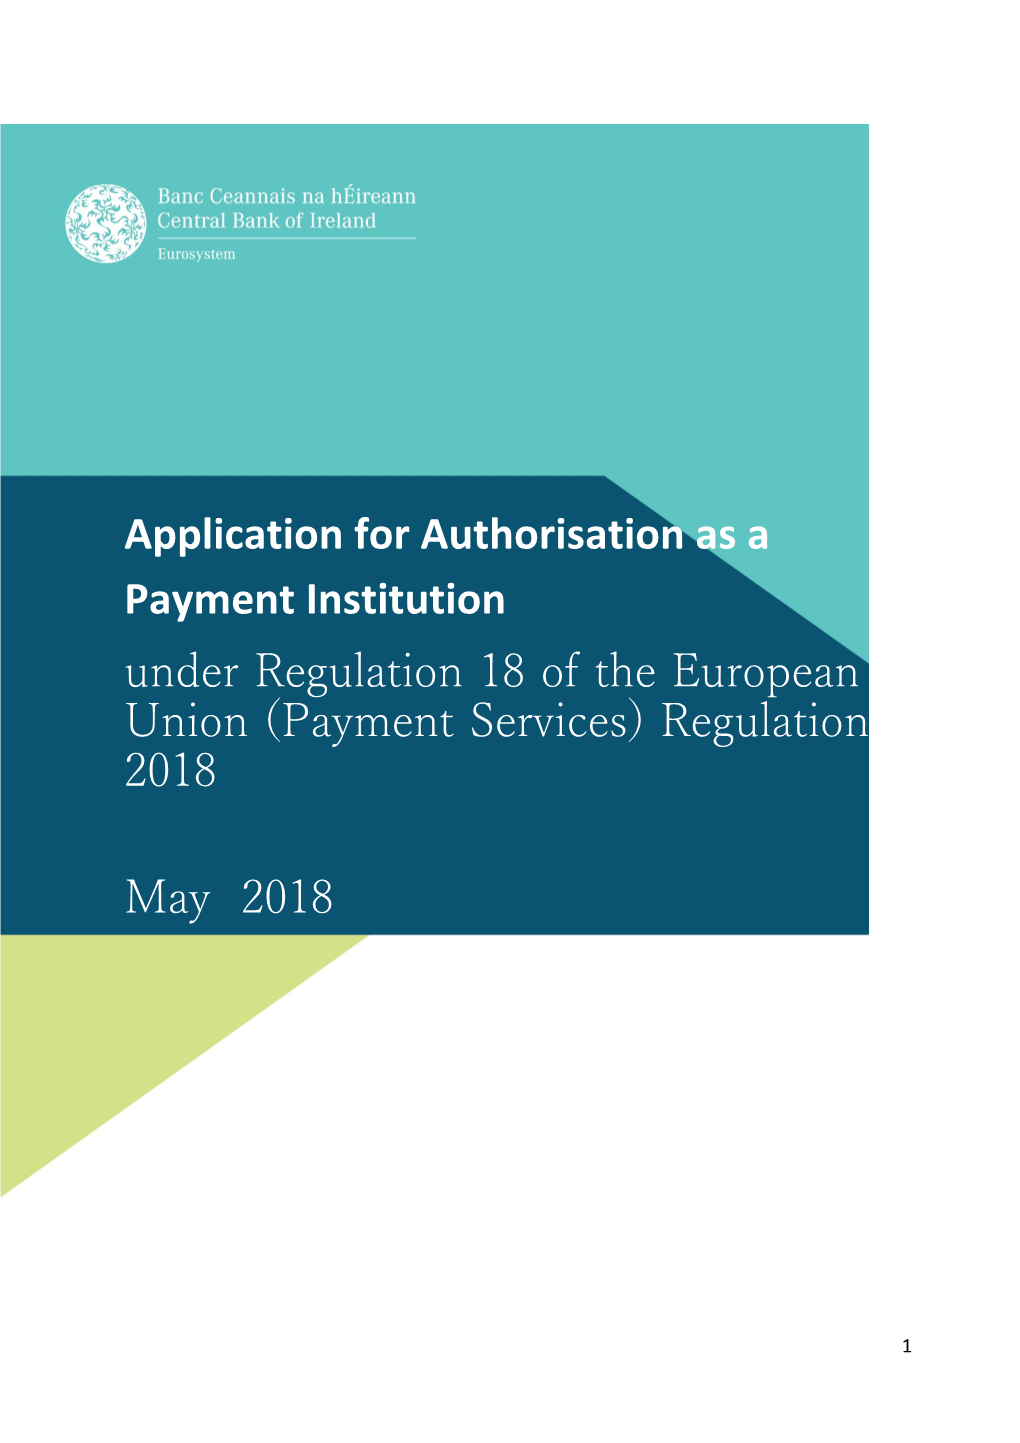 Application for Authorisation As a Payment Institution